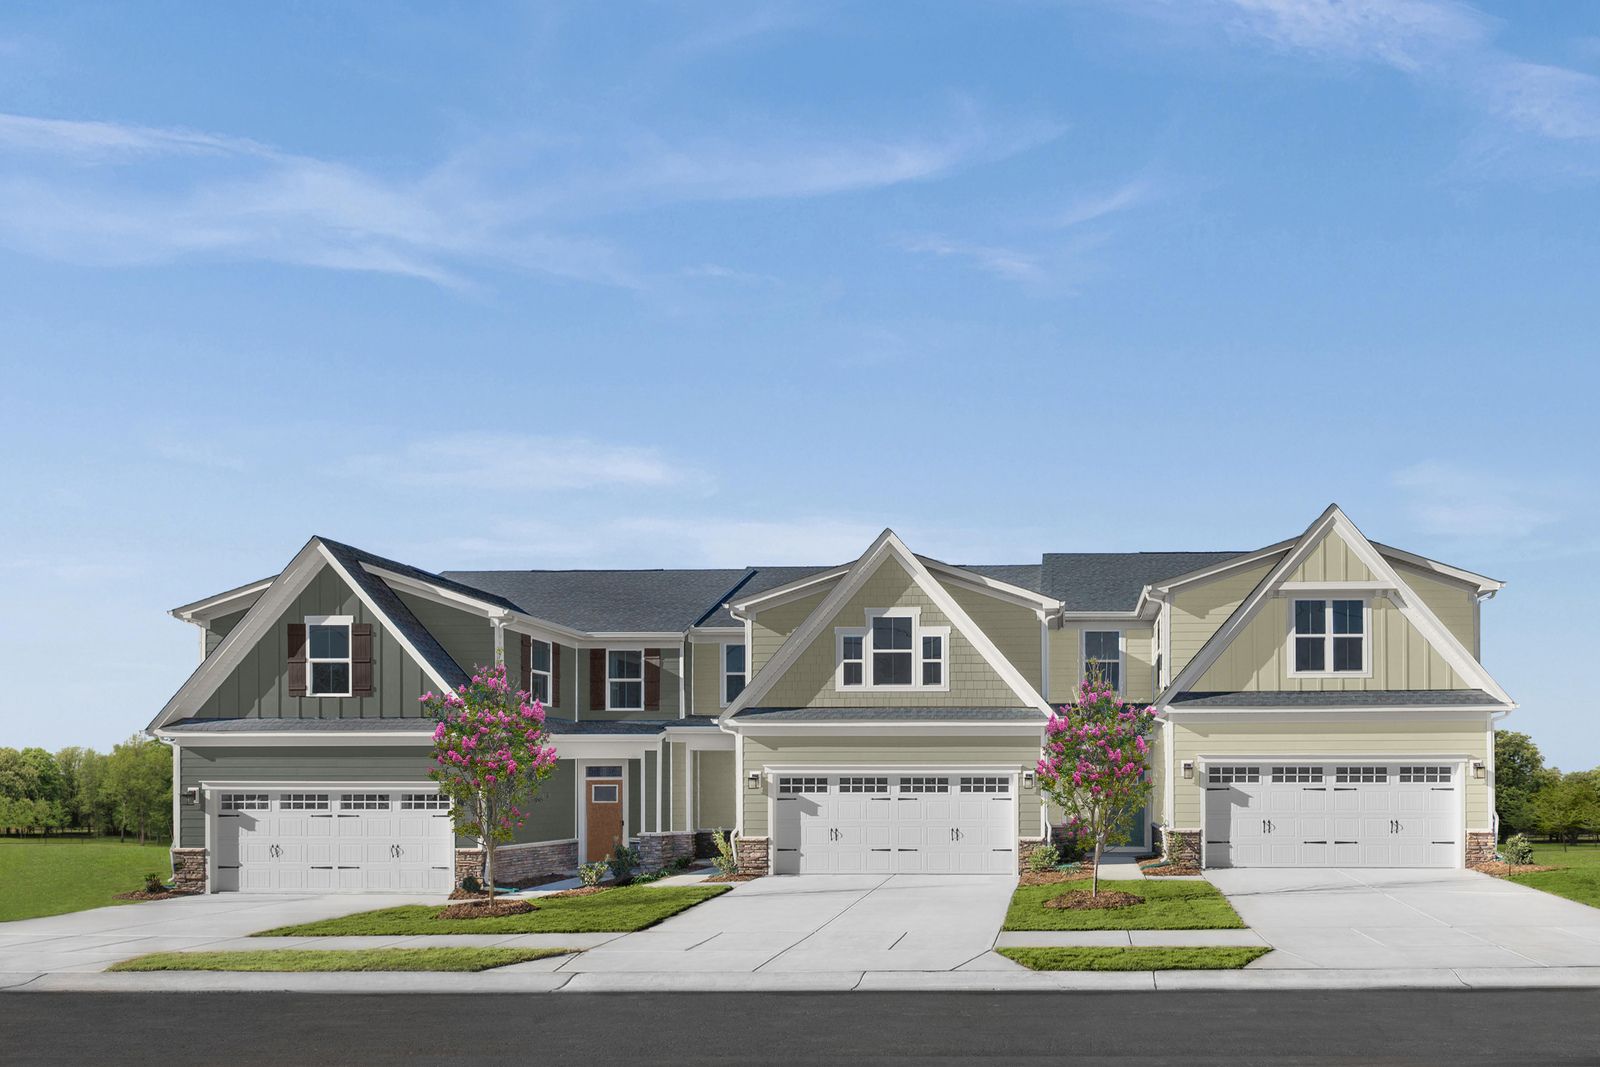 BEST VALUE NEW CONSTRUCTION HOMES WITH AMENITIES - FROM THE UPPER $200s